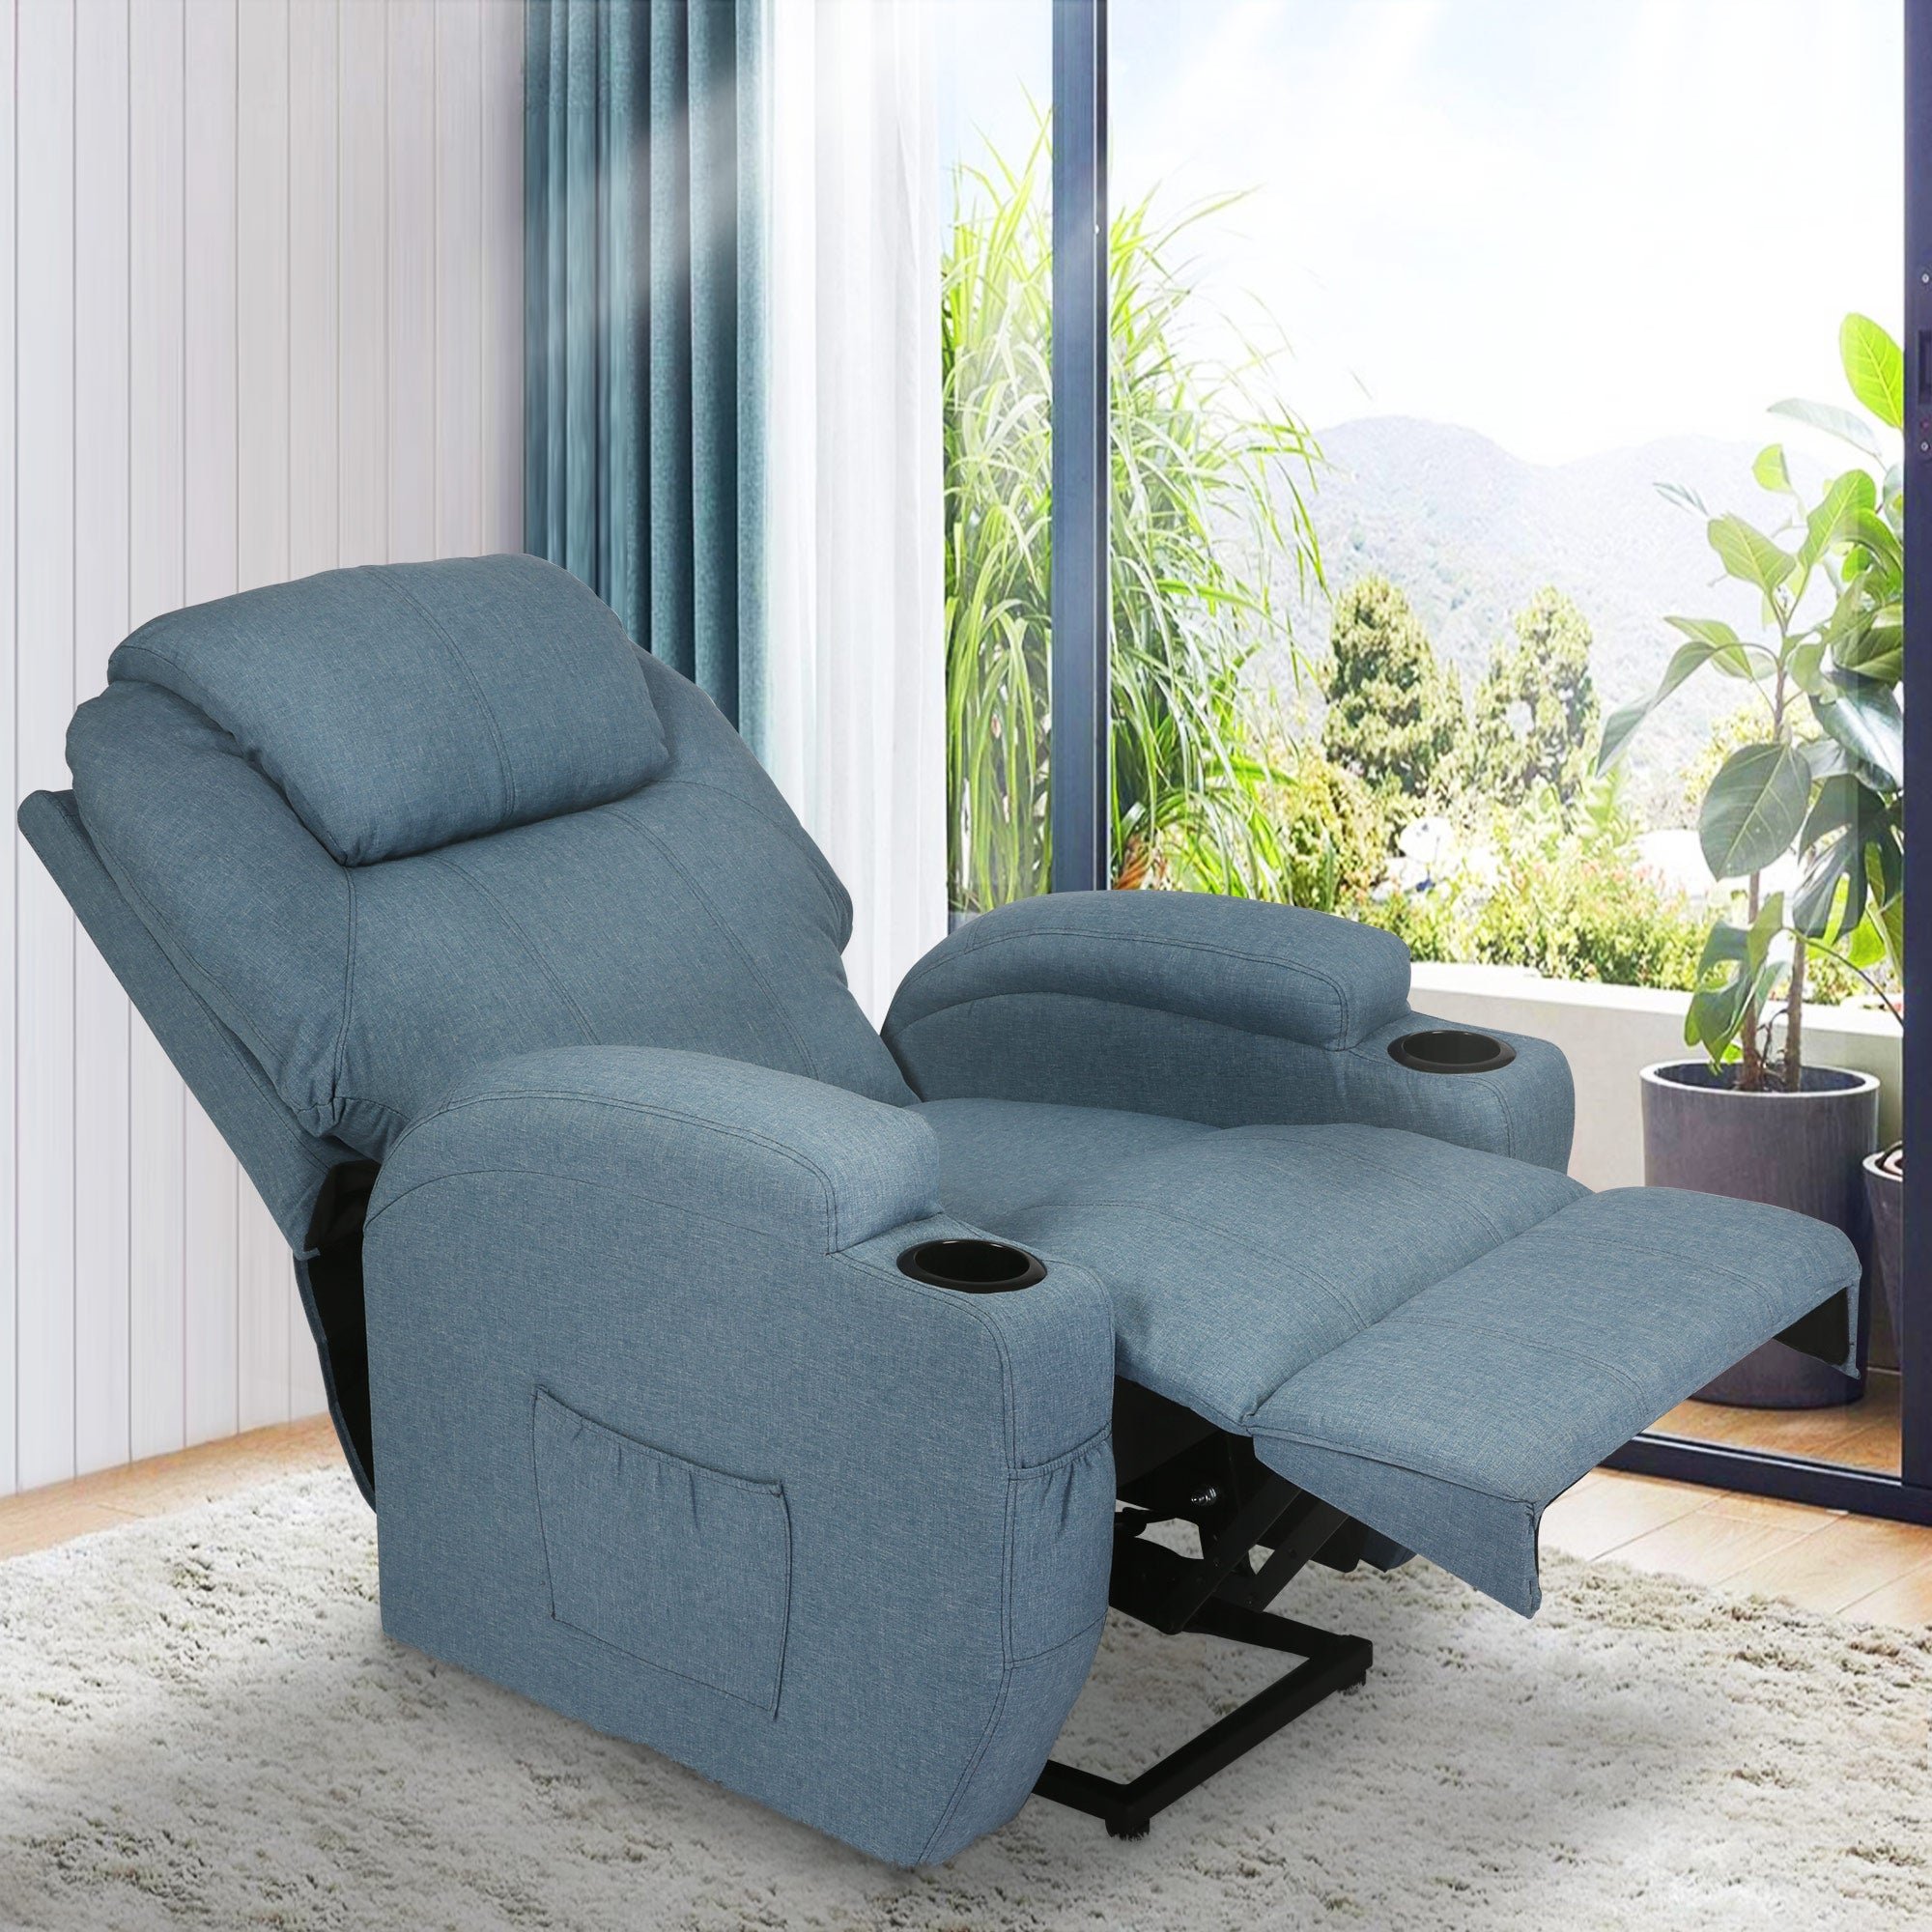 Power Lift Recliner Chair, Electric Full Body Massage Chair for Elderly with Massage and Heat, Blue